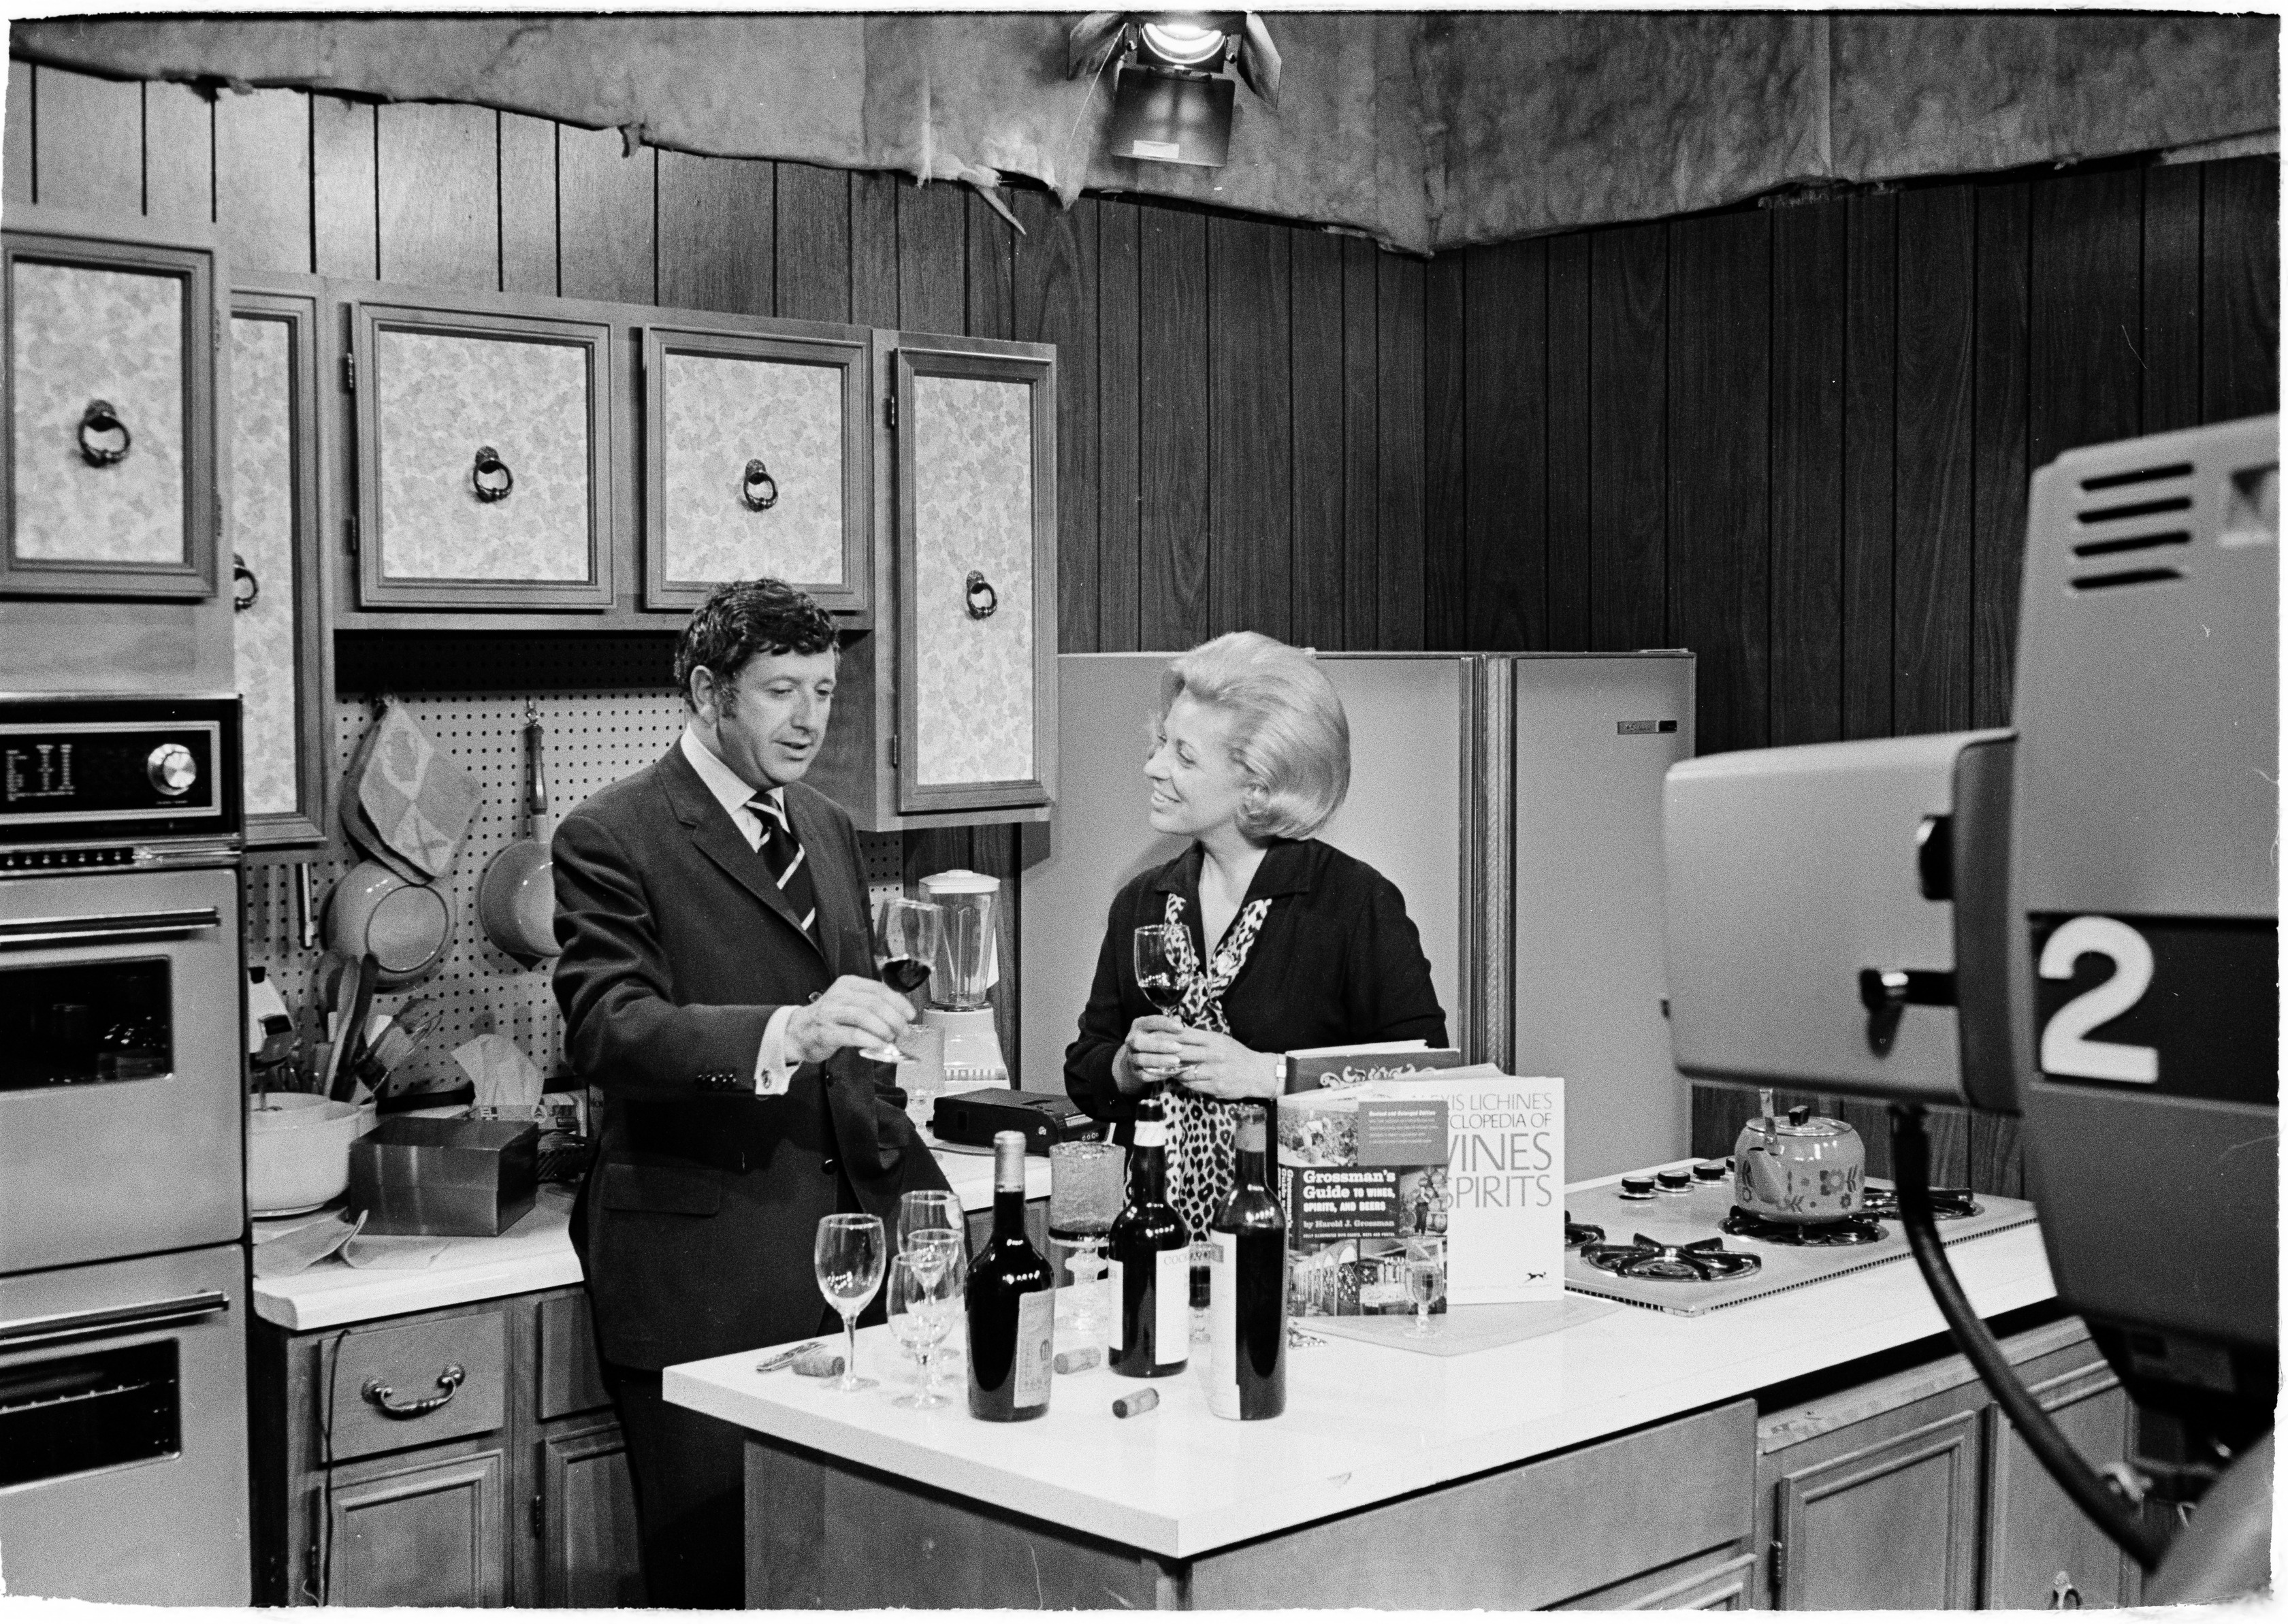 Photographs of Muriel Stevens and guests cooking, image 1